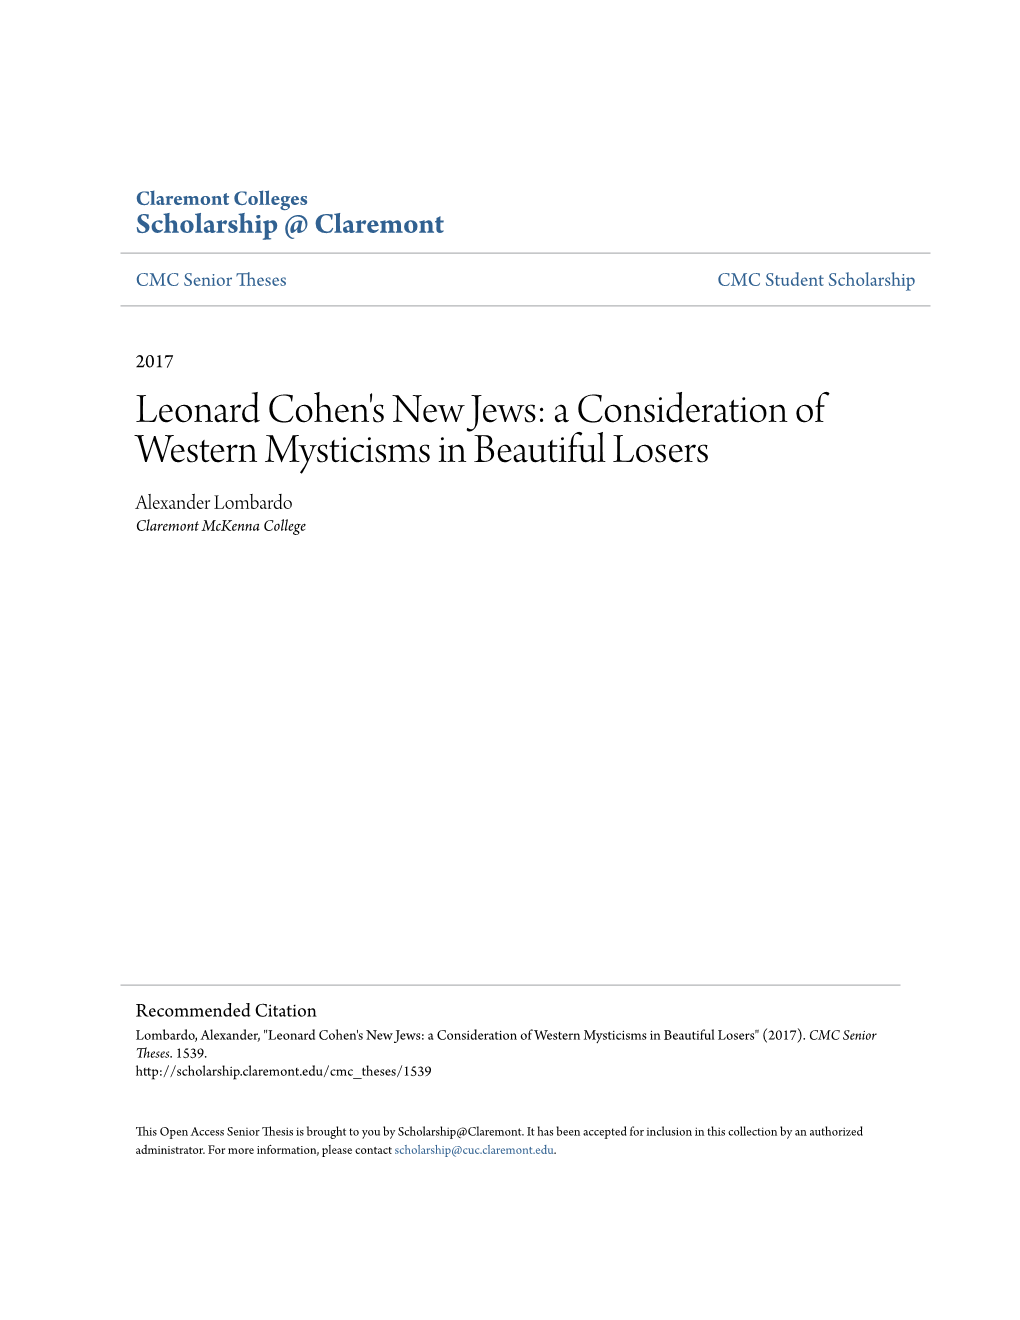 Leonard Cohen's New Jews: a Consideration of Western Mysticisms in Beautiful Losers Alexander Lombardo Claremont Mckenna College